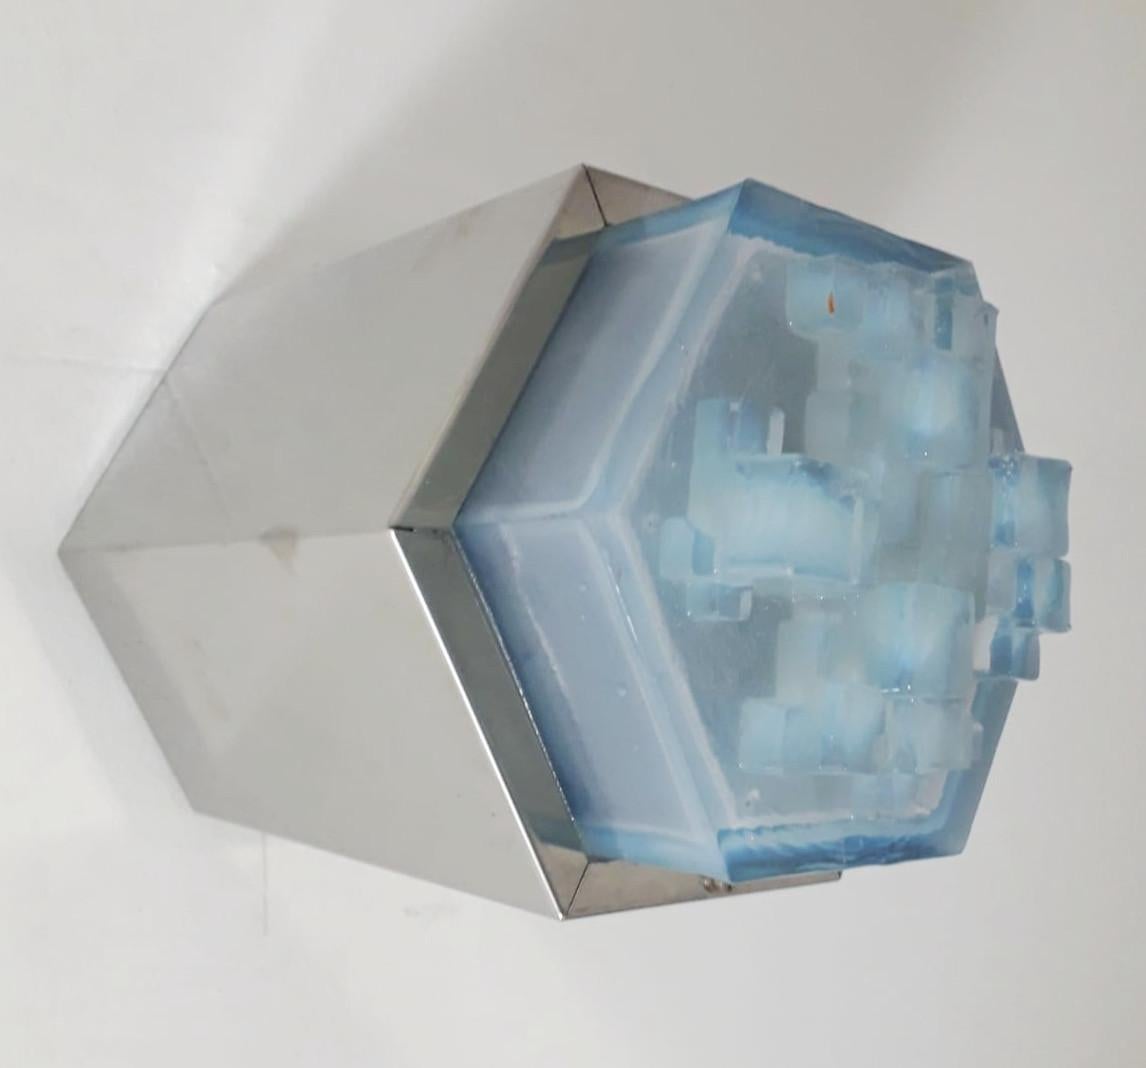 Vintage original midcentury wall light or flushmount with hexagonal steel frame and hexagonal light blue frosted glass diffuser by Poliarte / Made in Italy, circa 1960s
1 lights / E14 type / max 40W
Size: Diameter 7 inches, height 8.5 inches
4